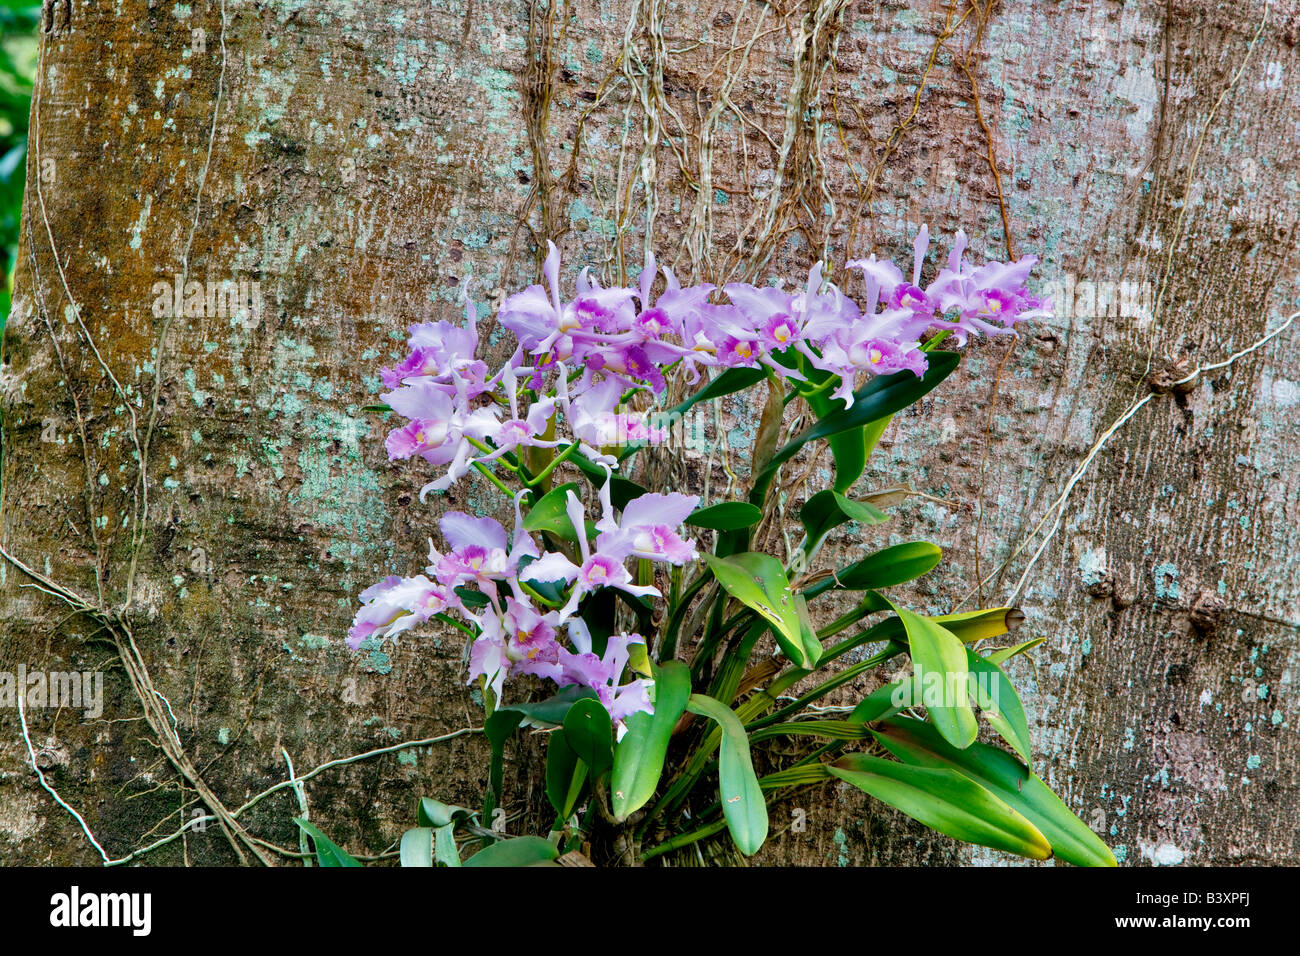 Orchid growing on tree dans National Kauai Hawaii Banque D'Images